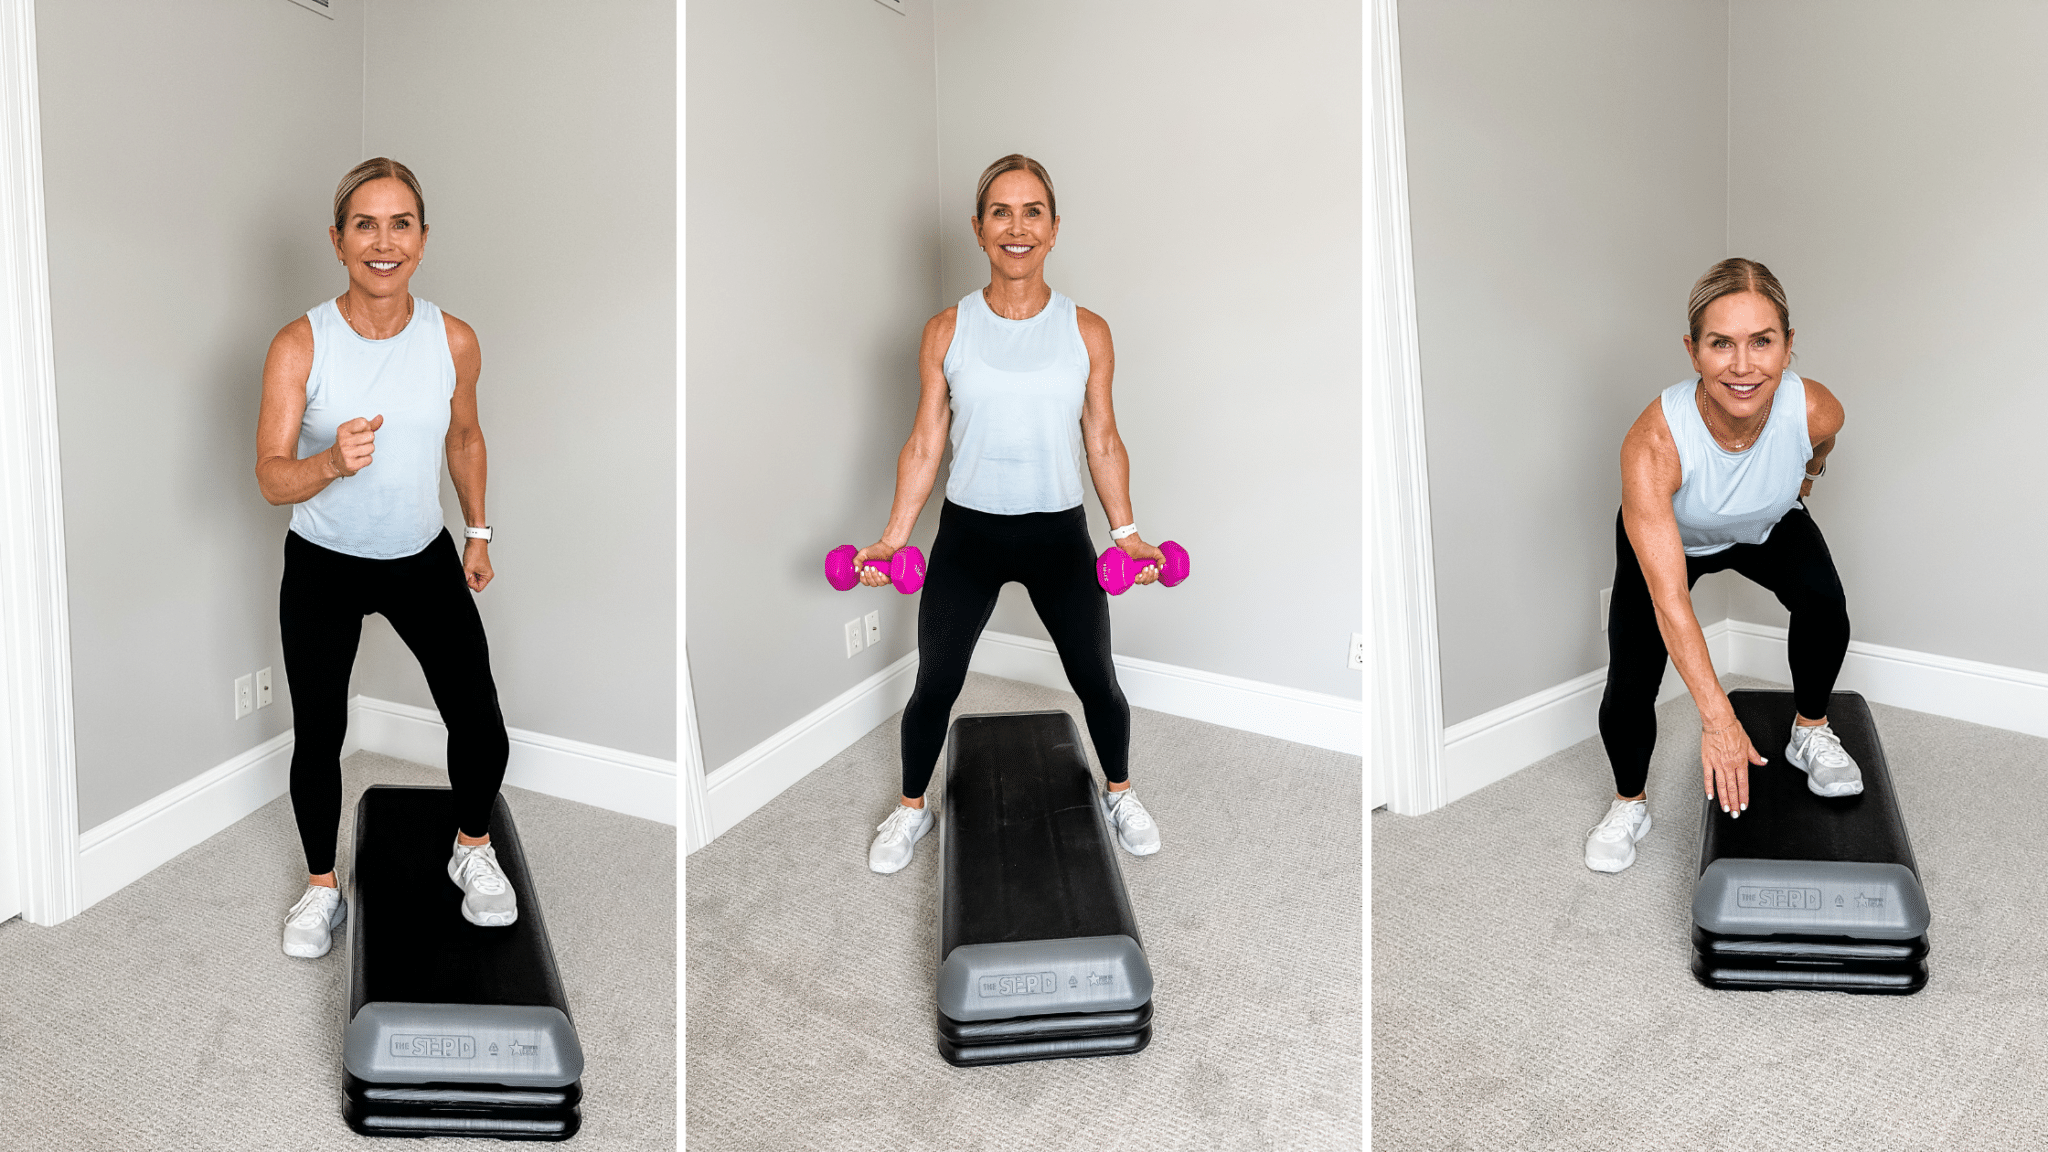 3 images of Chris Freytag doing exercises on the step platform for a step workout at home.